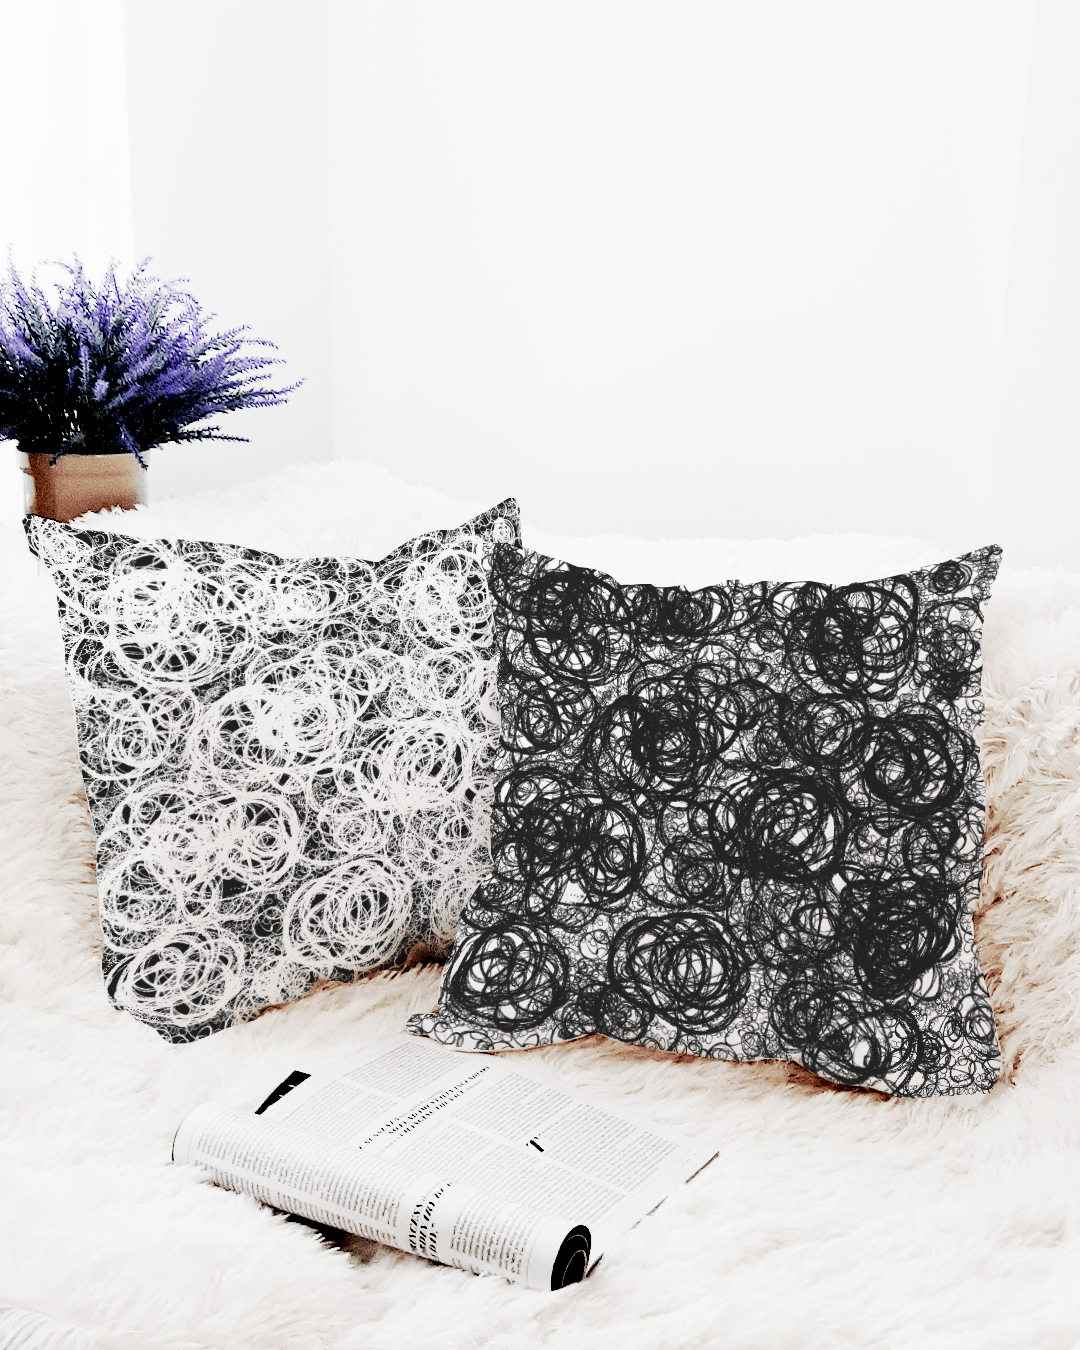 Cherise Abstract Scribble Art Decorative Throw Pillow Accent Cushion - White Pillow A Moment Of Now Women’s Boutique Clothing Online Lifestyle Store